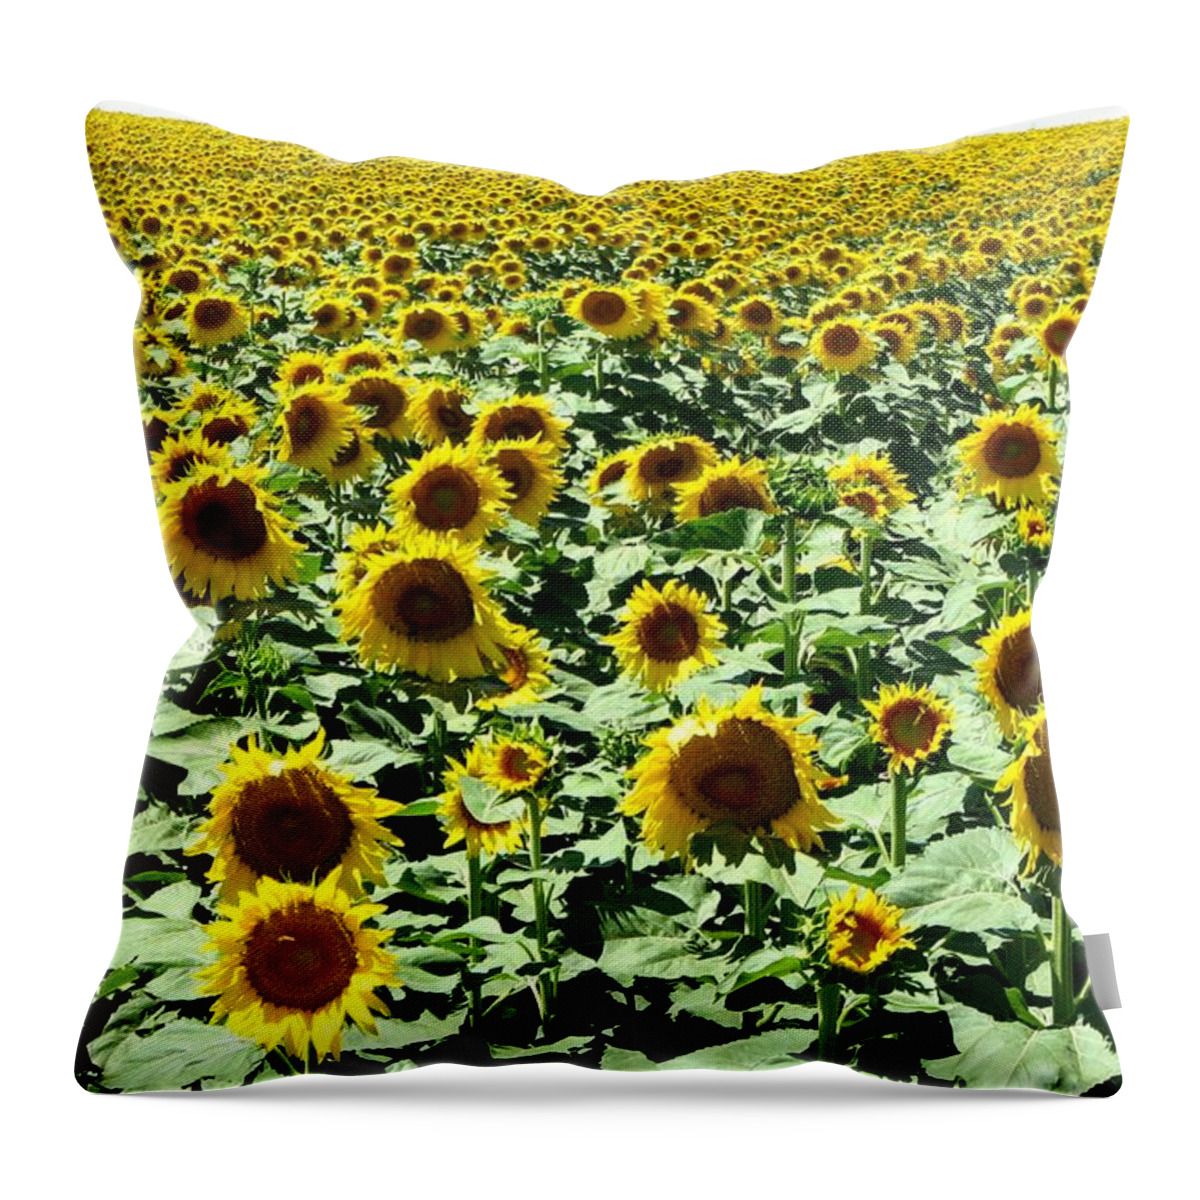 Sunflowers Throw Pillow featuring the photograph Kansas Sunflower Field by Keith Stokes